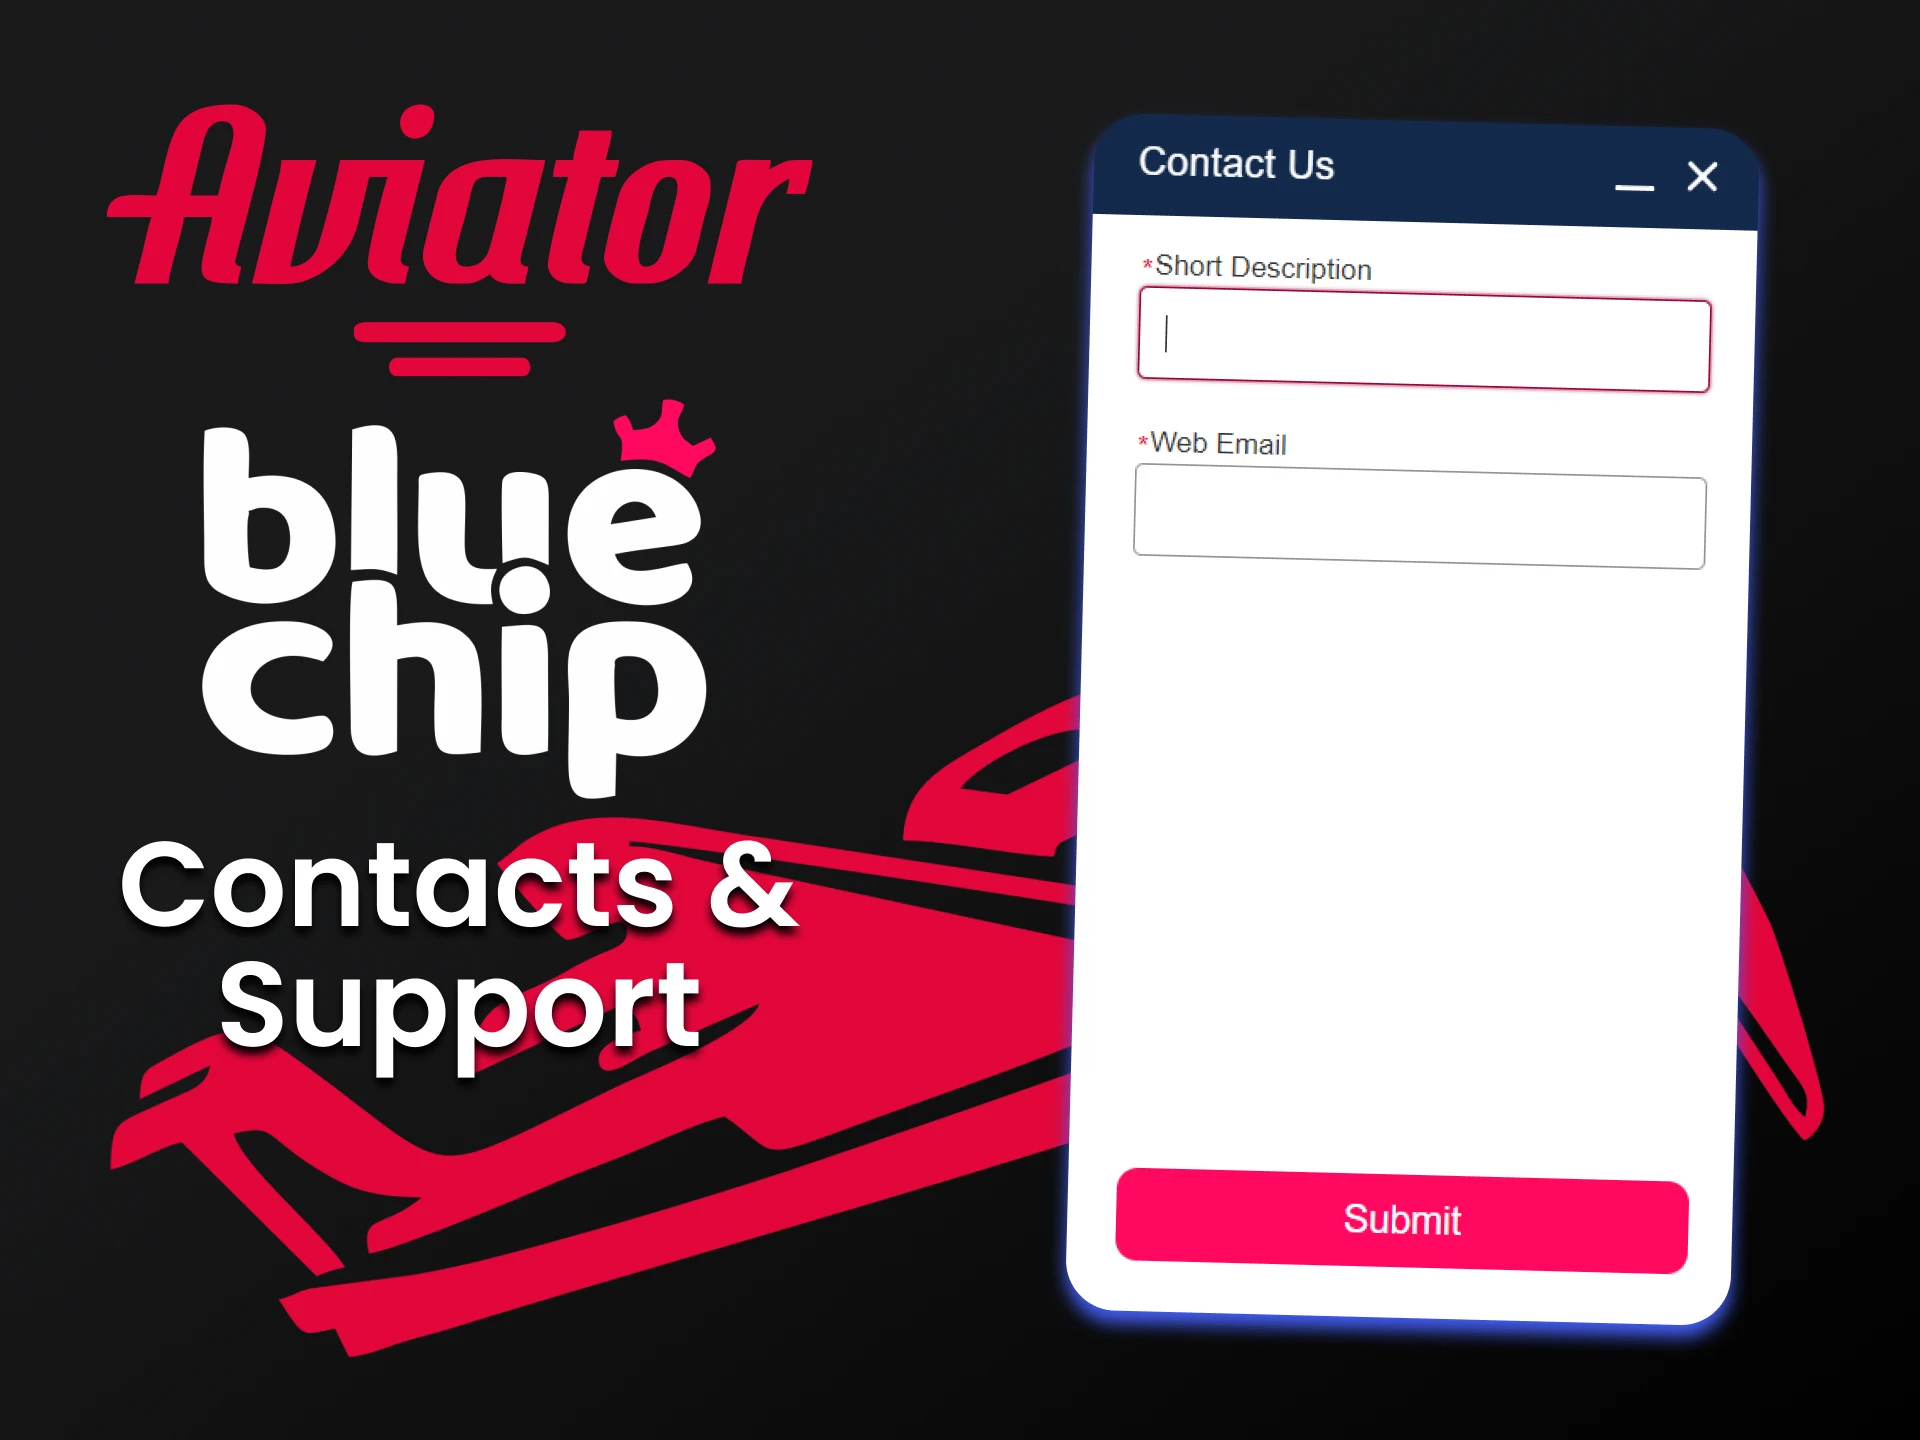 Use Bluechip's chat to answer questions.